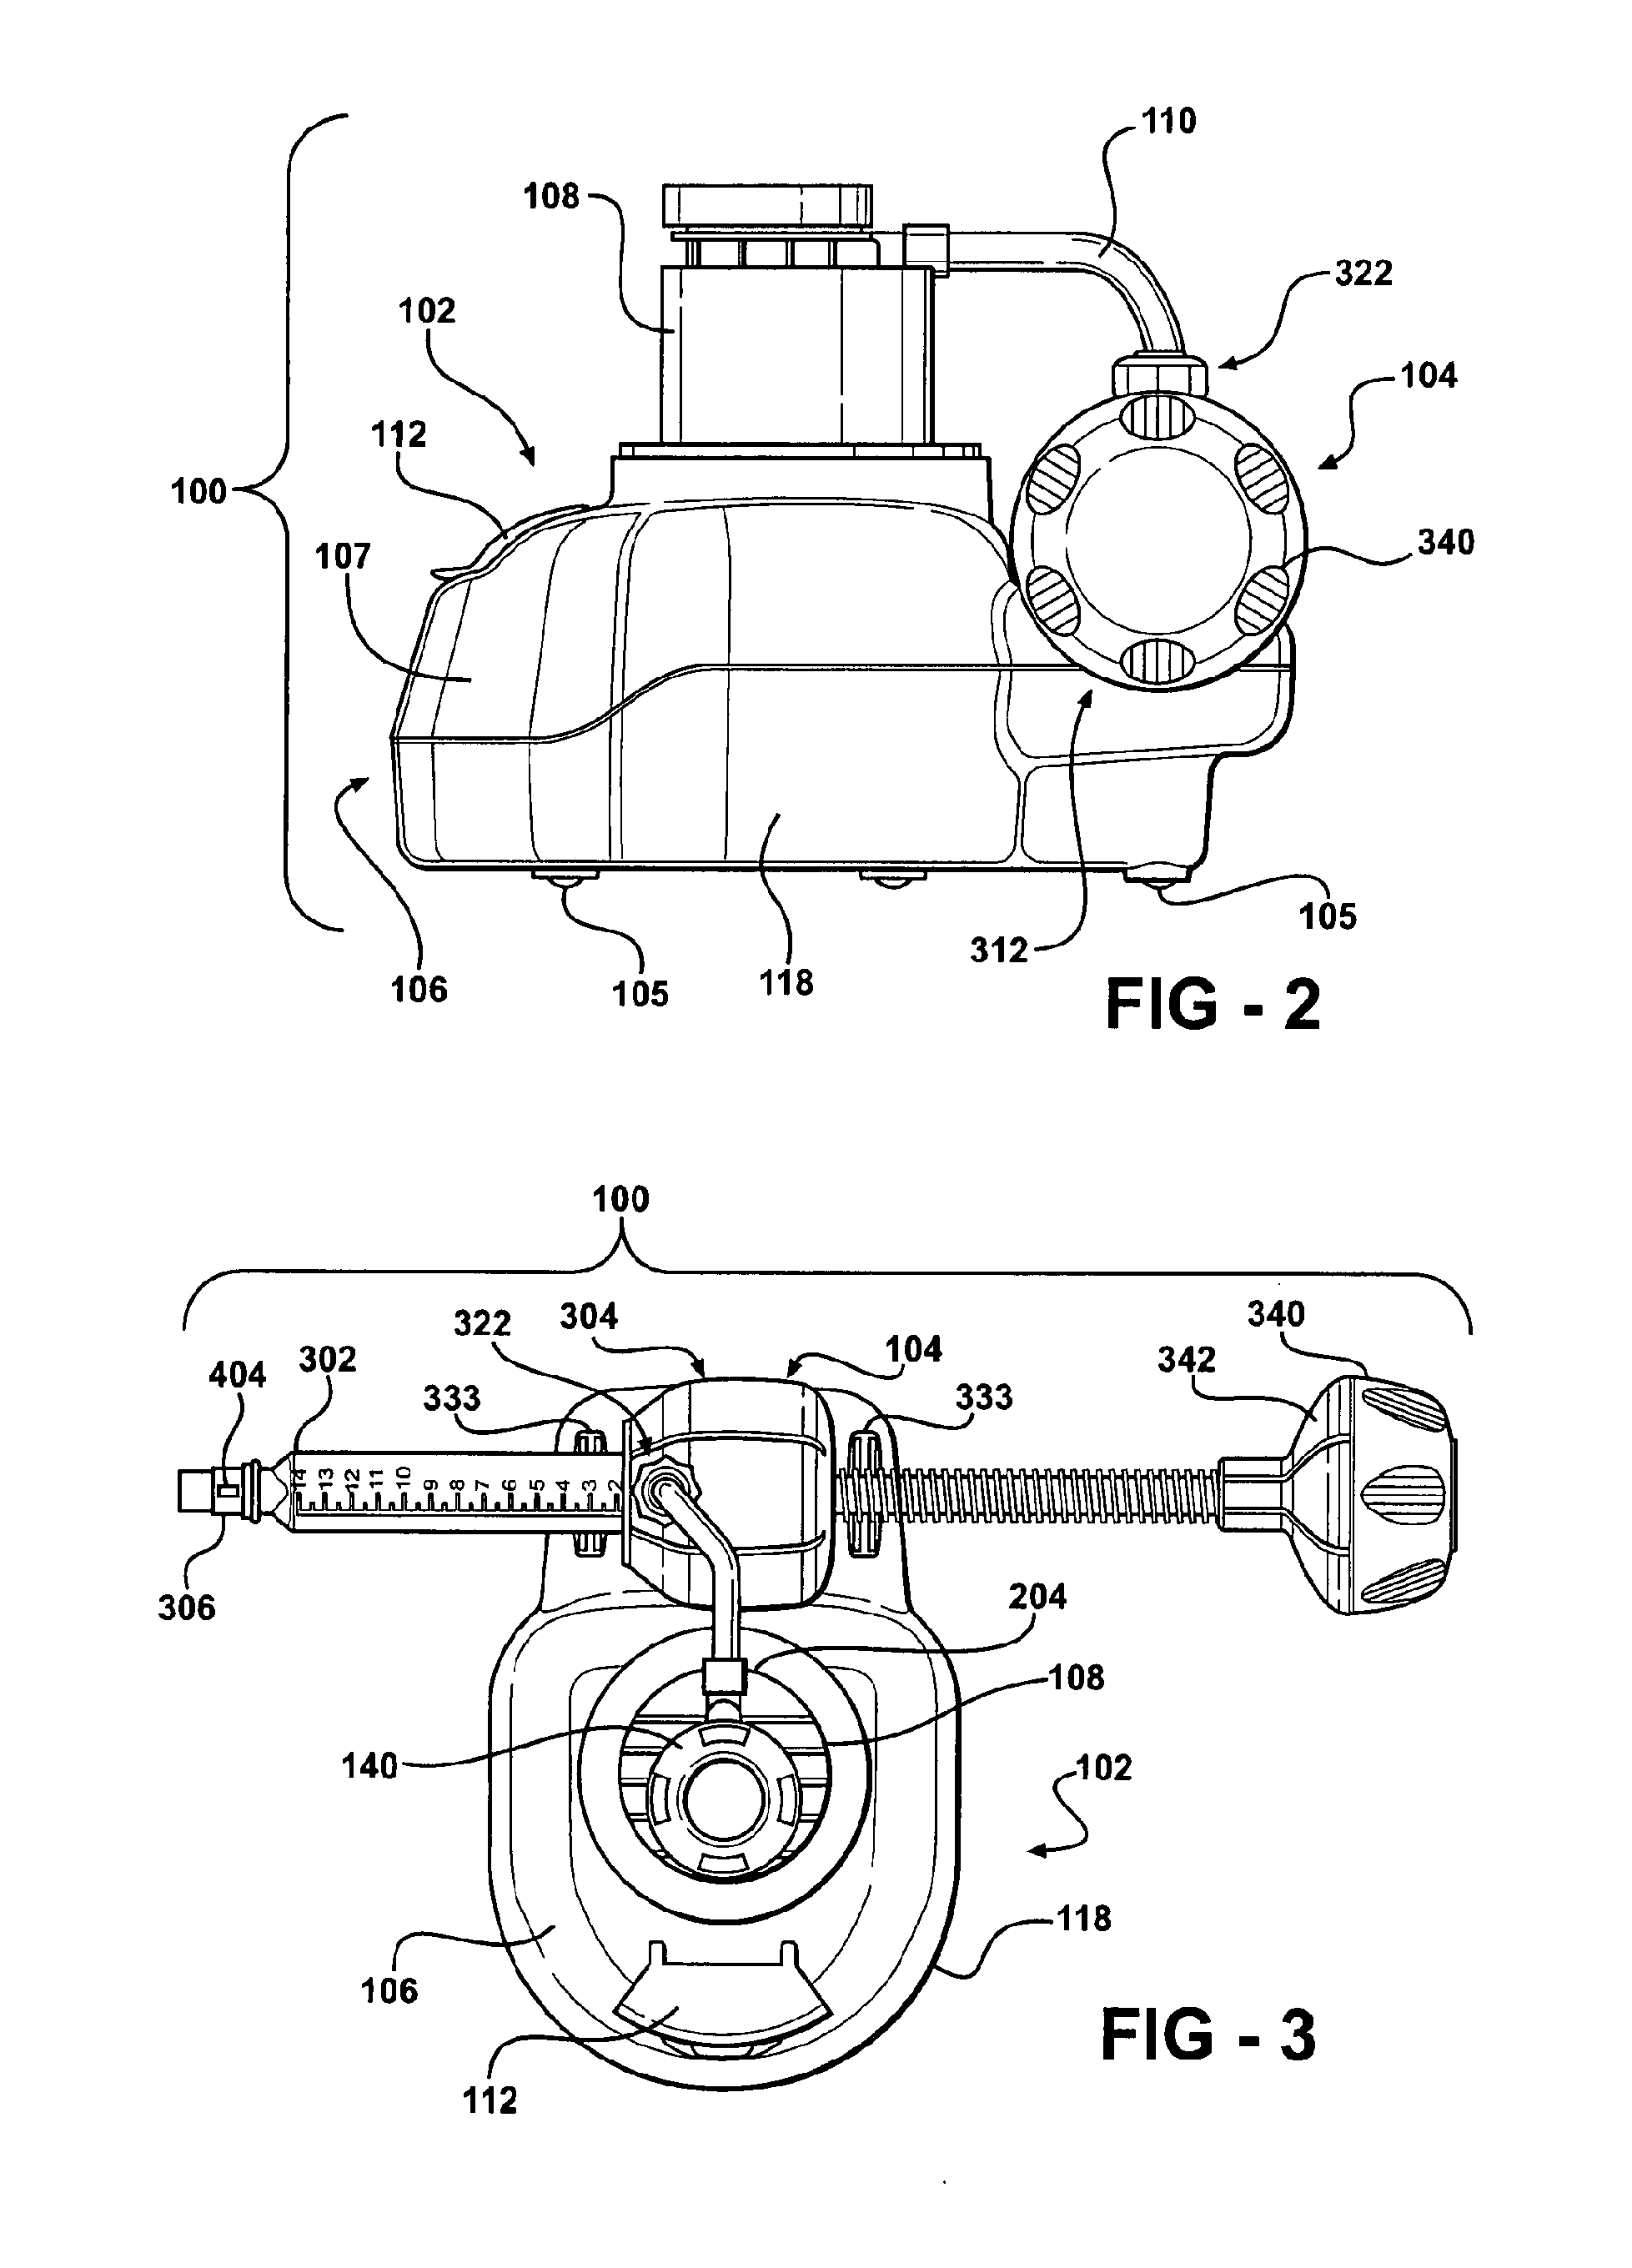 Bone cement mixing and delivery system with automated bone cement transfer between mixer and delivery device and method of mixing and automated transfer of bone cement between mixer and delivery device and method of mixing and automated transfer of bone cement between mixer and delivery device